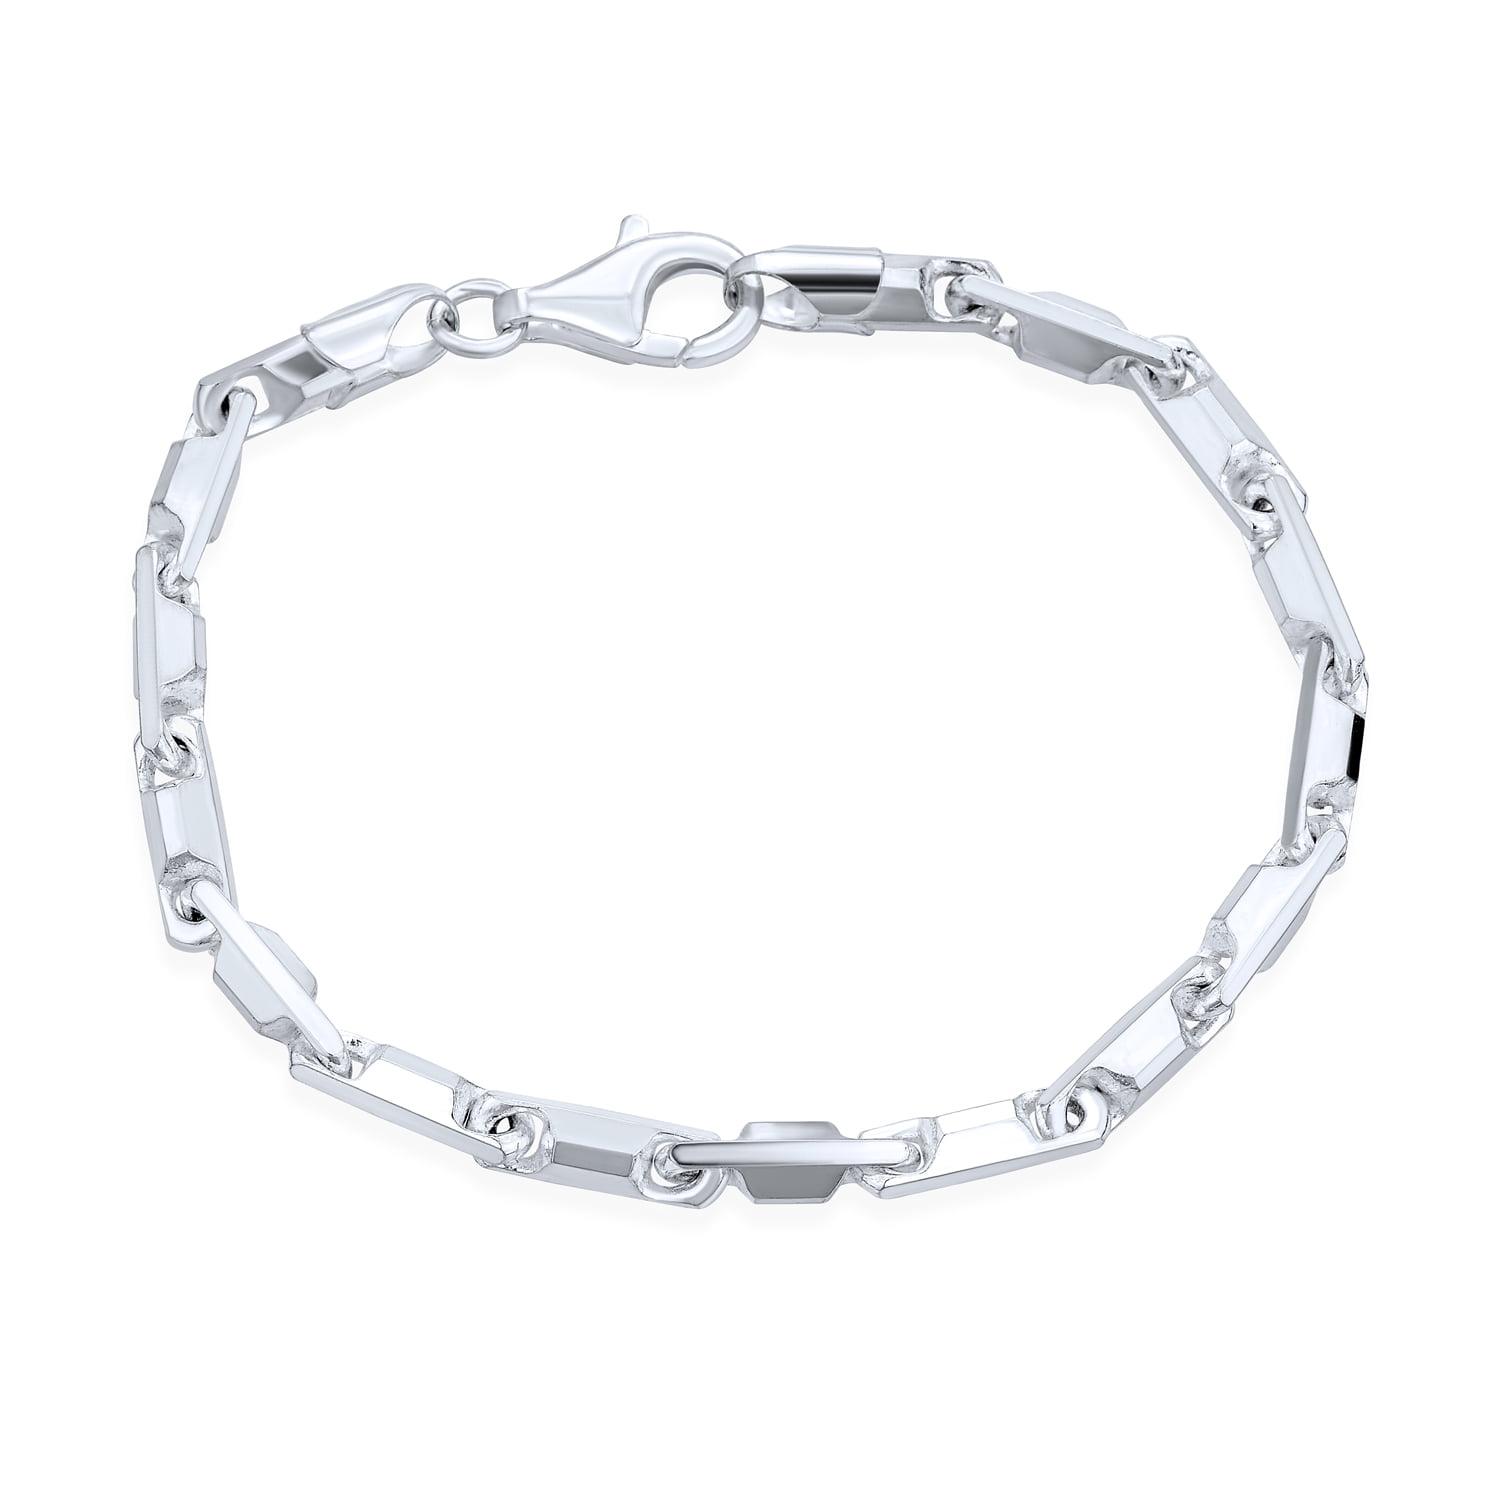 Bling Jewelry Mens 4.5mm Solid Heavy Sterling Silver 6-Sided Bar Chain Link  Bracelet 8.5 Inch